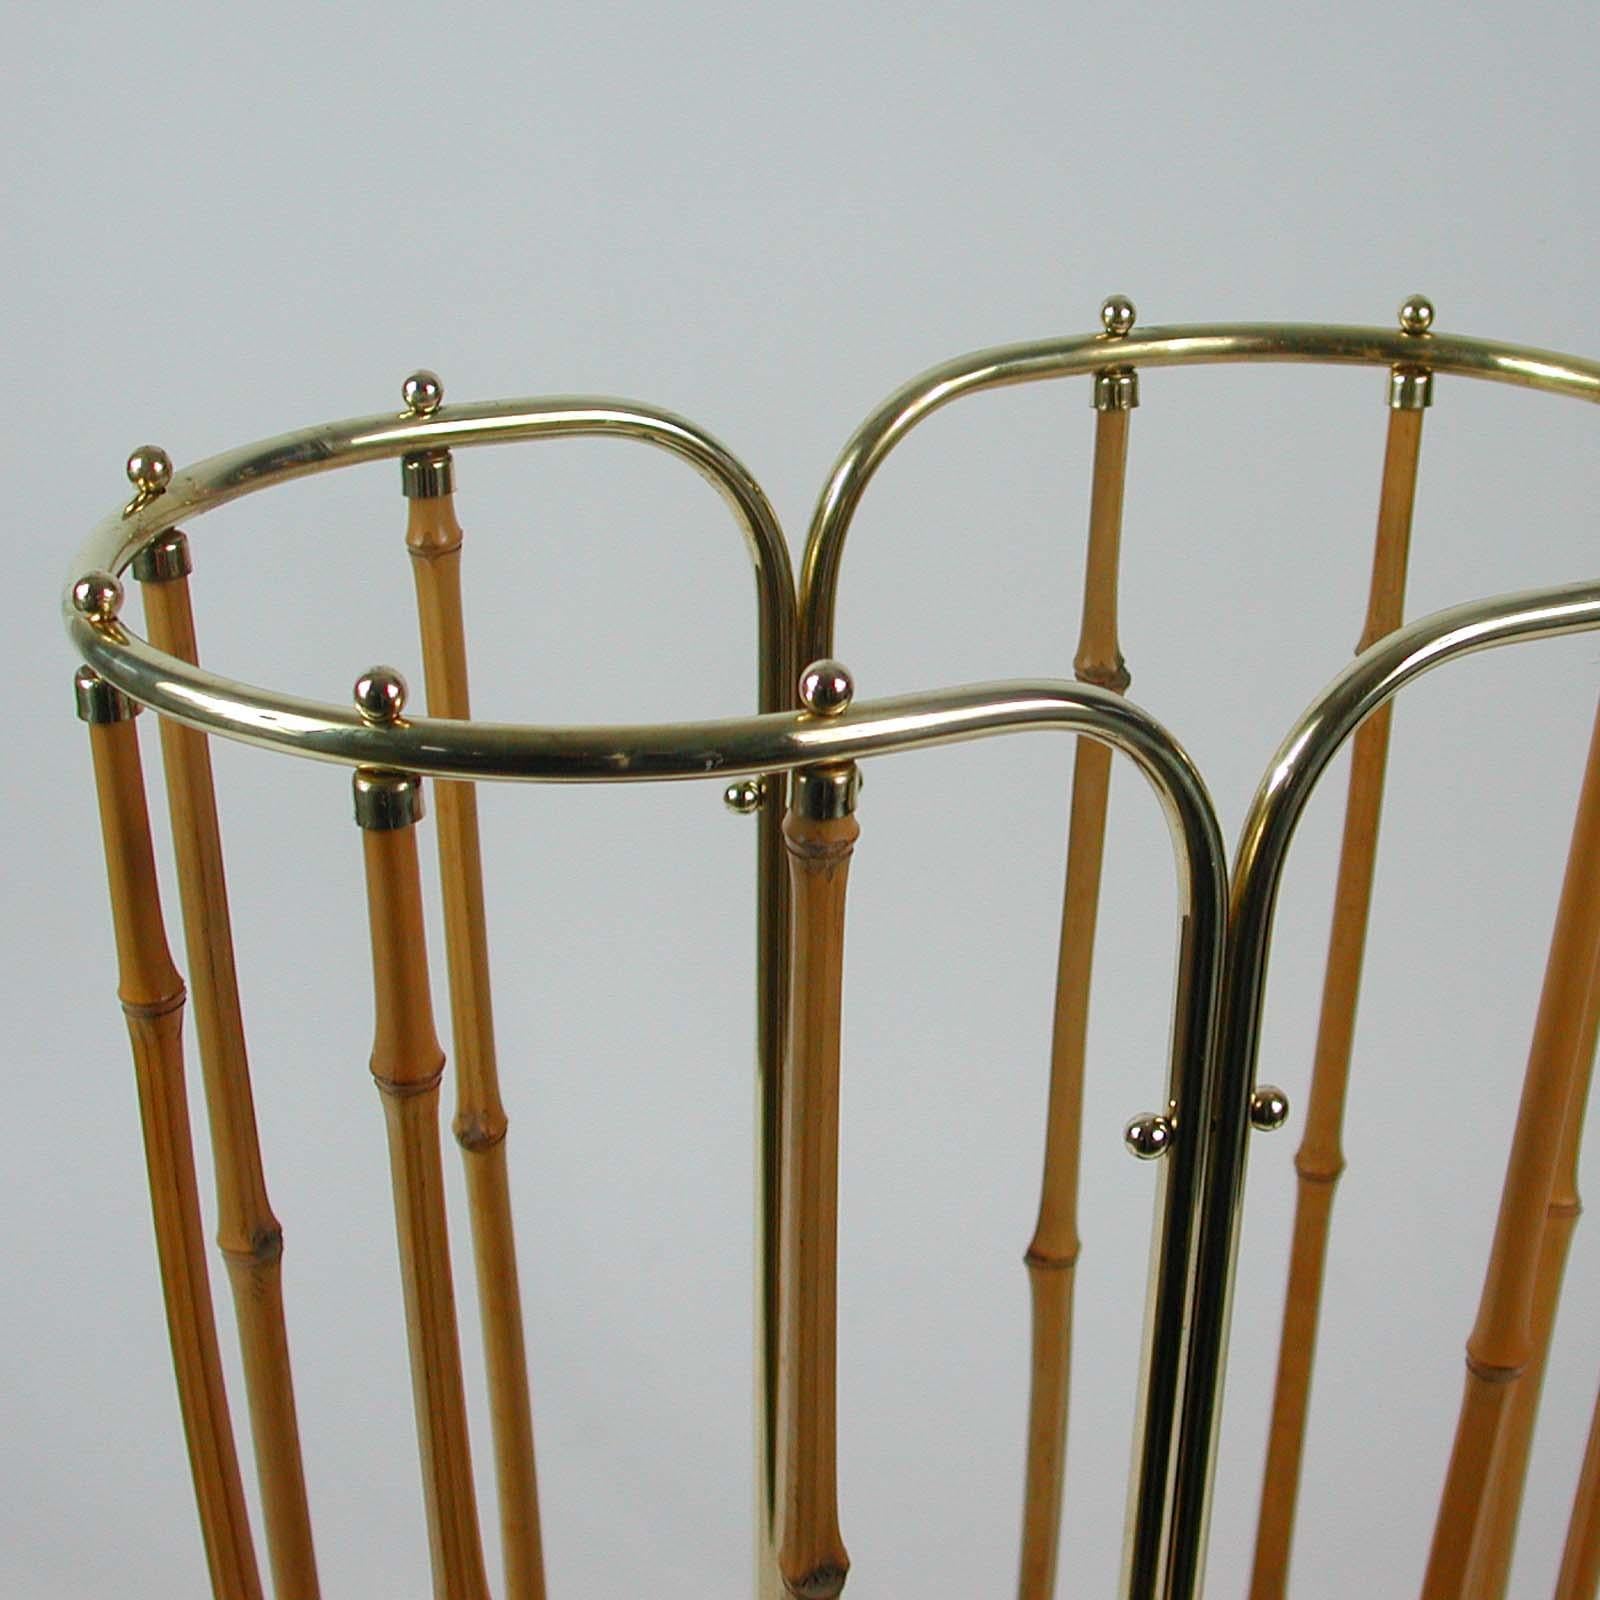 Midcentury Bamboo and Brass Umbrella Stand, Austria, 1950s For Sale 3